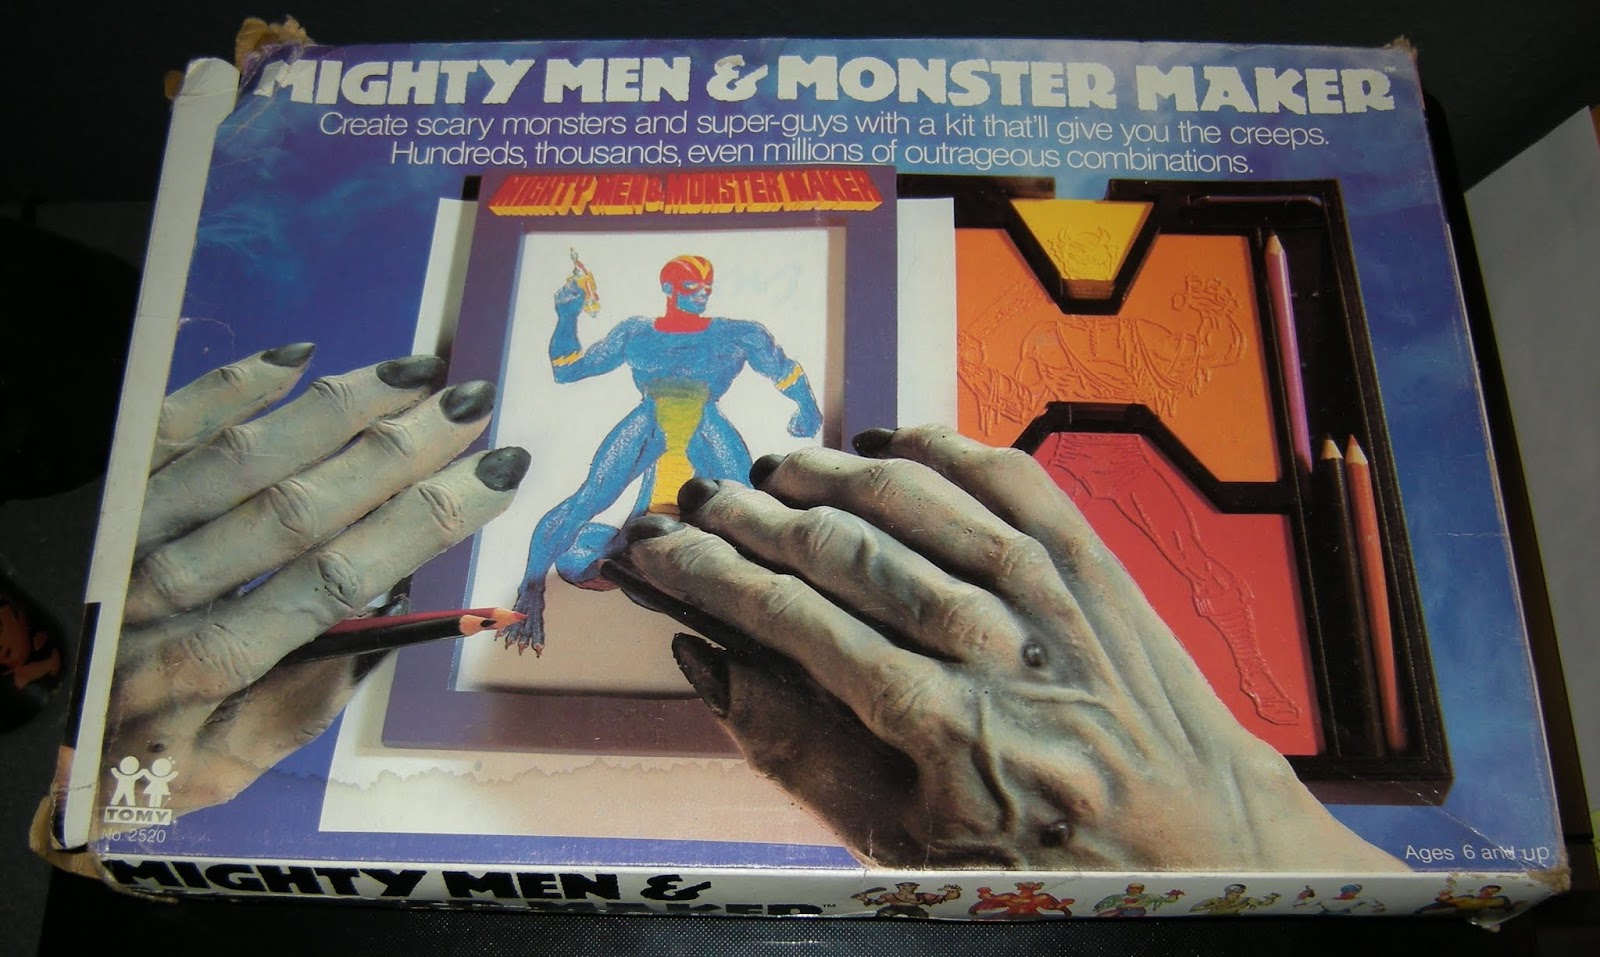 vintage toys - mighty men and monster maker - Mighty Men & Monster Maker Create scary monsters and superguys with a kit that'll give you the creeps. Hundreds, thousands, even millions of outrageous combinations. Teemunster Mac, Ana Tomy No 2520 Ages 6 ane